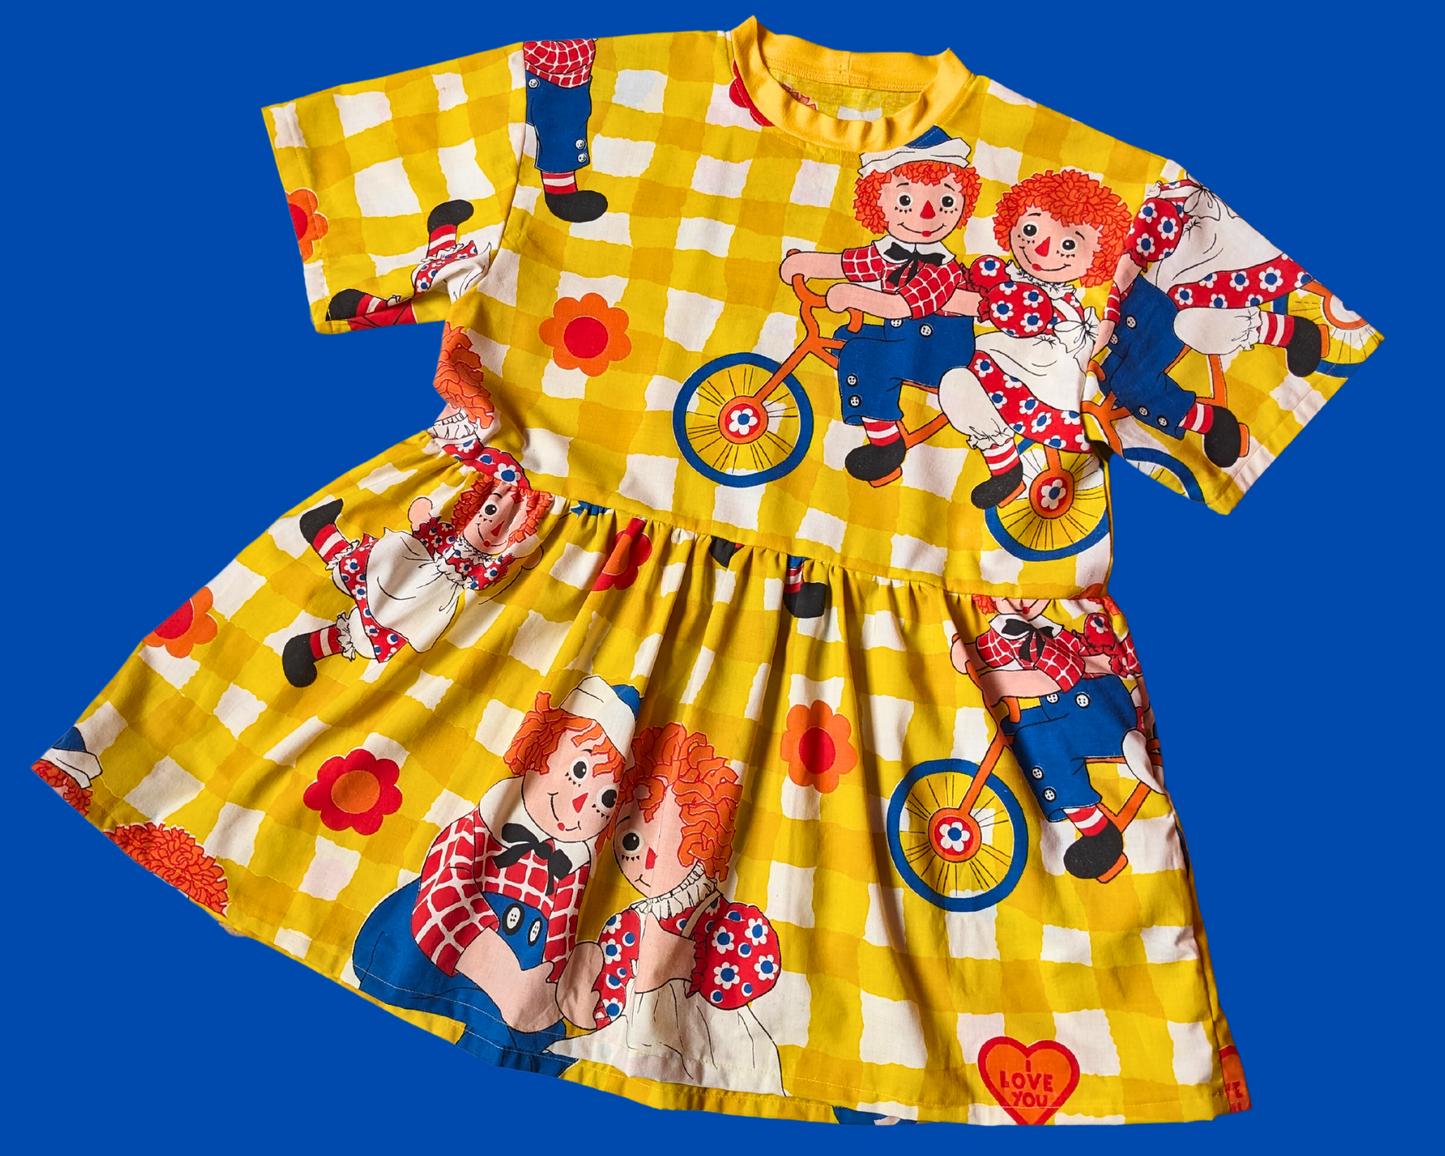 Handmade, Upcycled Vintage 1980's Raggedy Ann & Andy Bedsheet T-Shirt Dress Fits S-M-L-XL